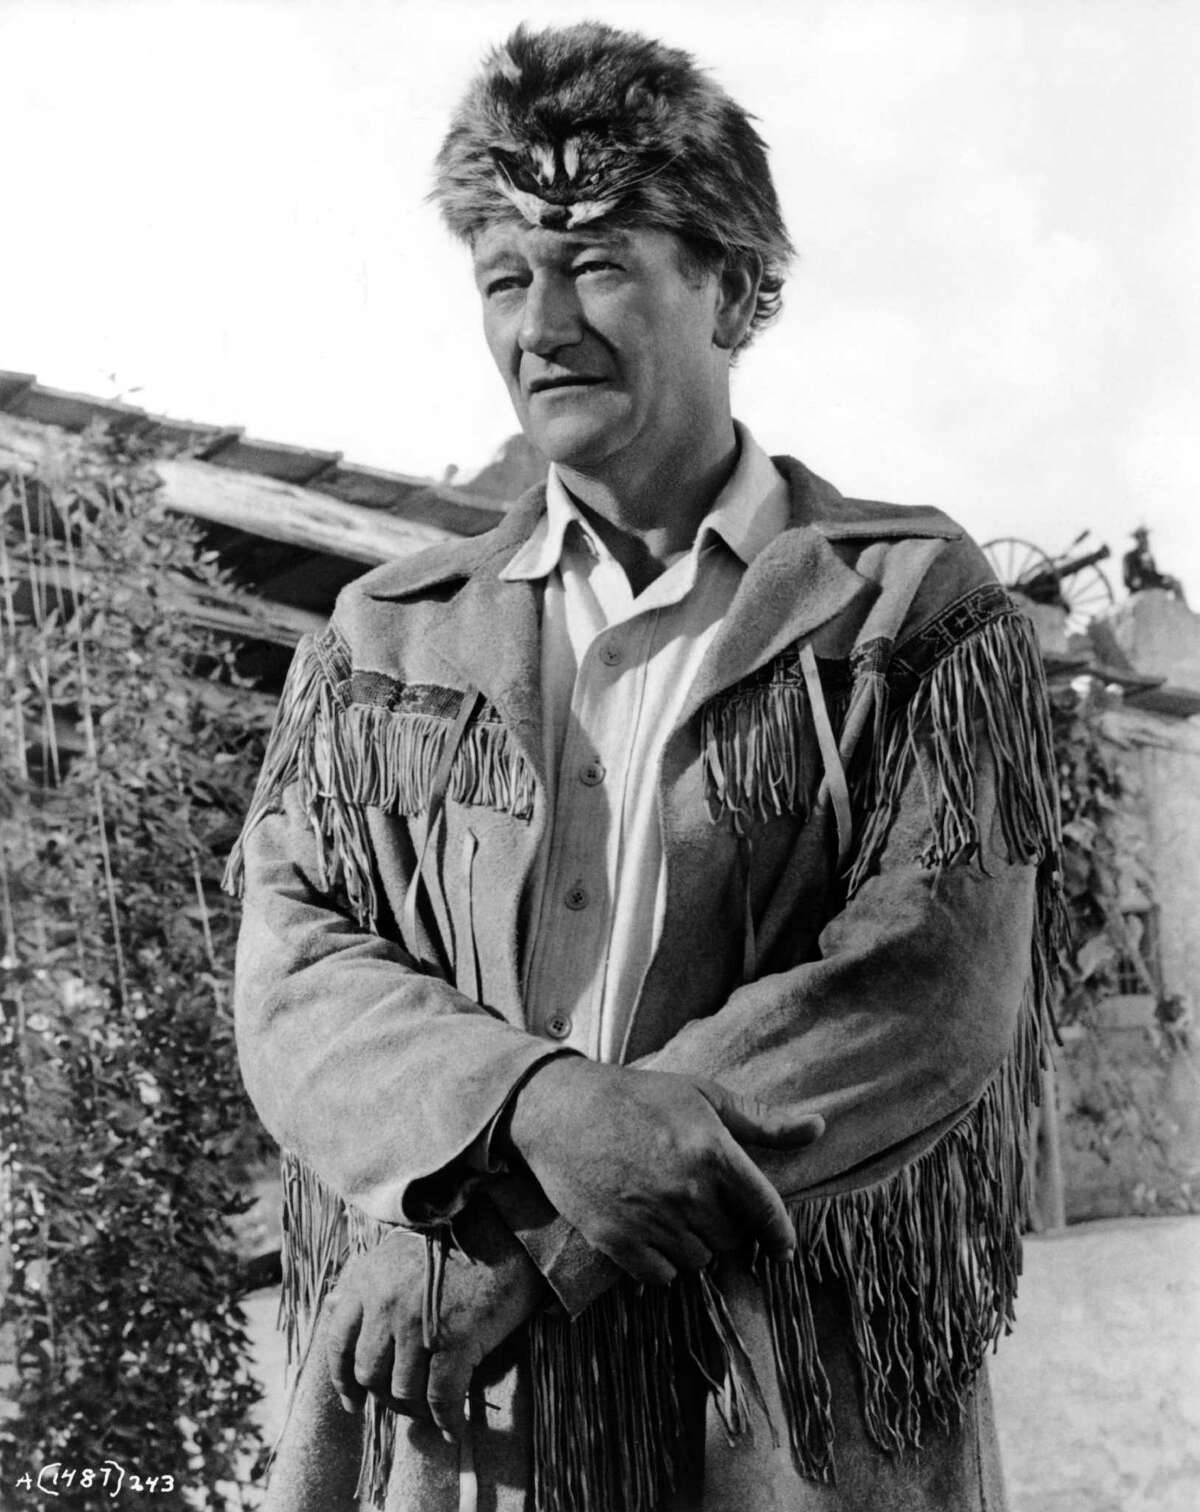 John Wayne is photographed on the set of his movie "The Alamo" in 1960 at the Alamo Village he had built for the film in Brackettville.